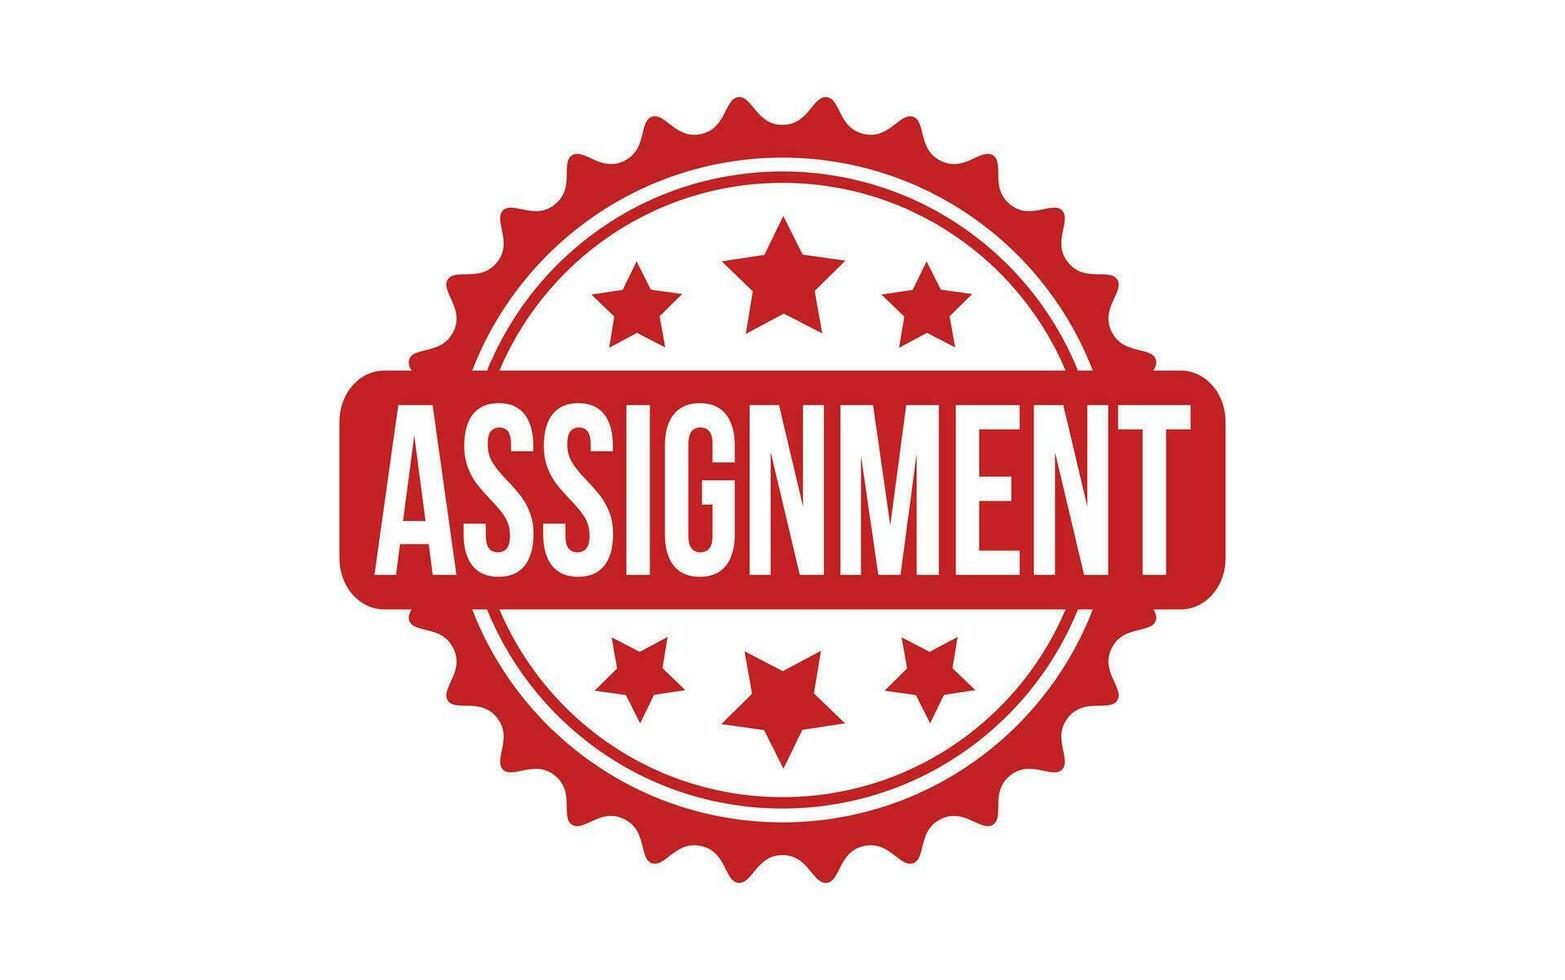 Assignment rubber grunge stamp seal vector